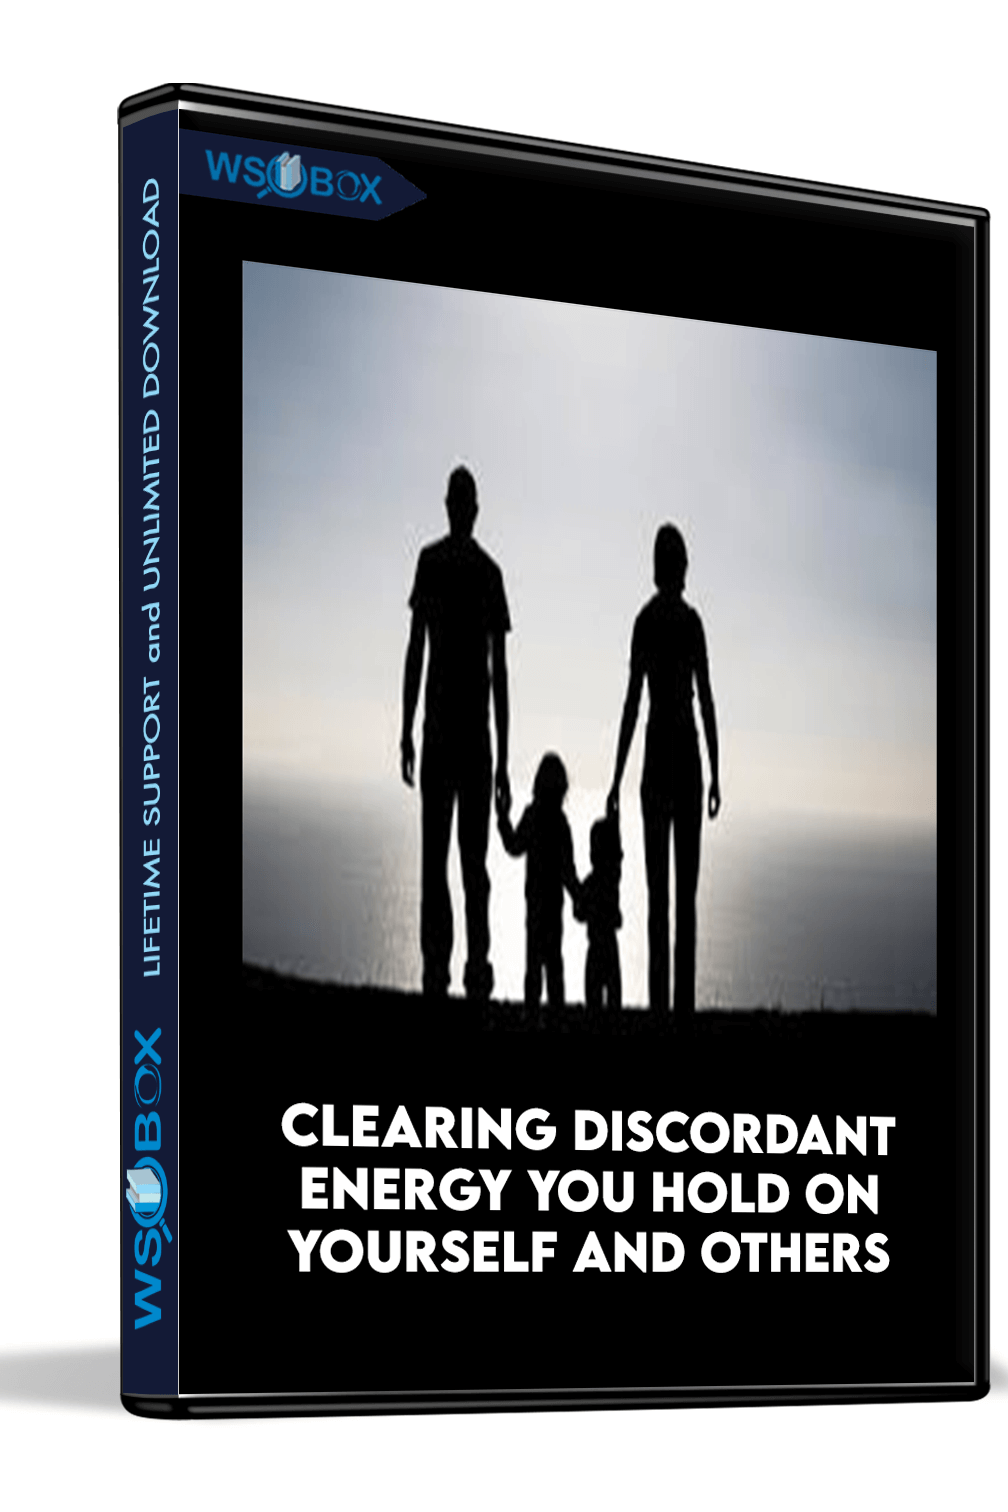 Clearing Discordant Energy You Hold on Yourself and Others